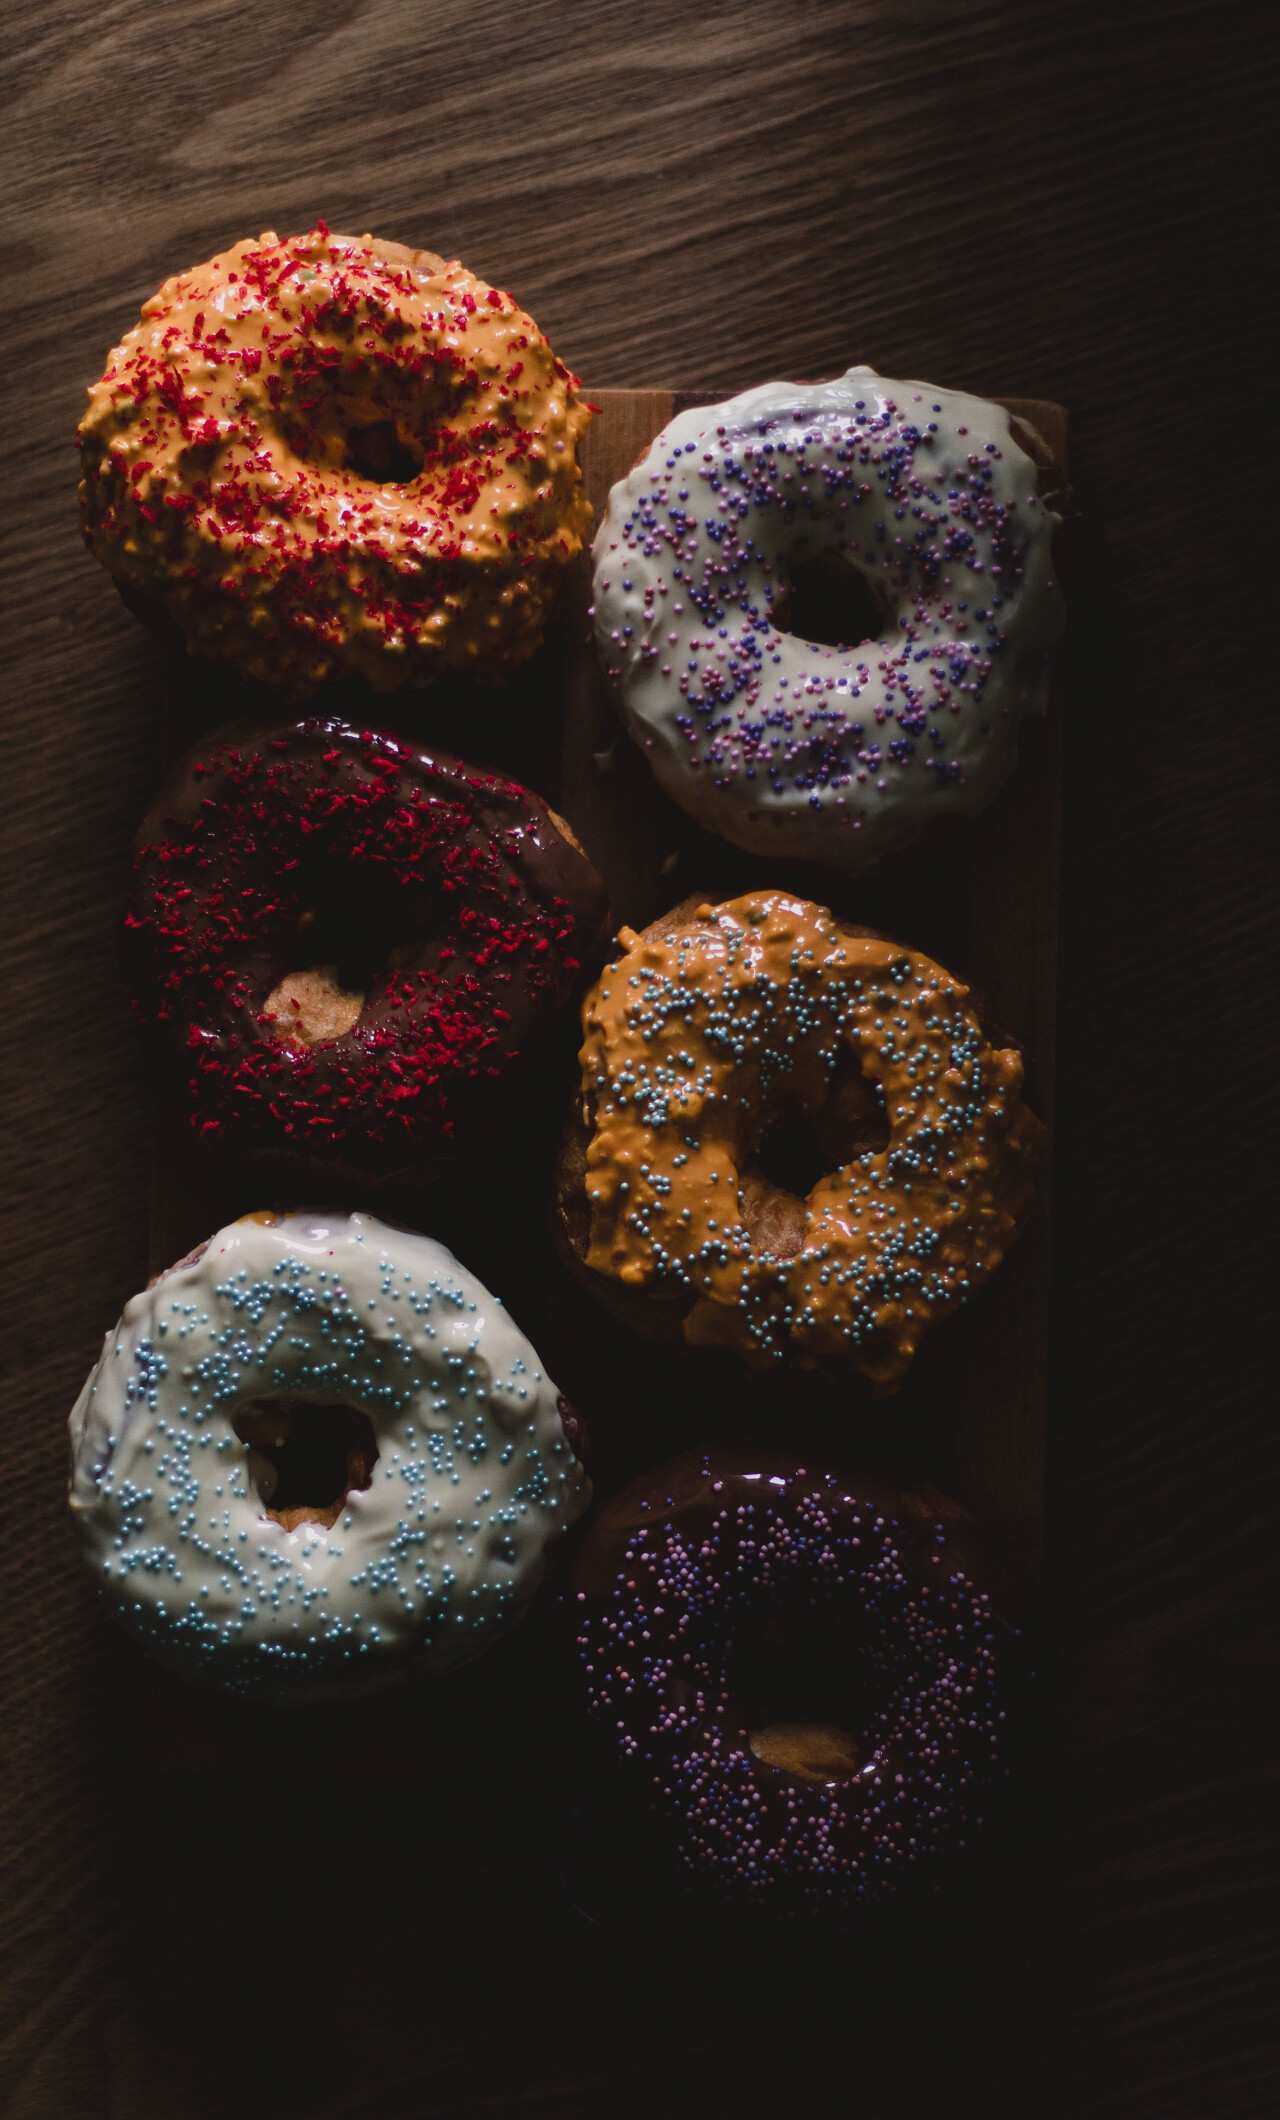 Colorful doughnut allure, Tempting iPhone 6 Plus wallpaper, Deliciously sweet, Indulgent delight, 1280x2120 HD Phone